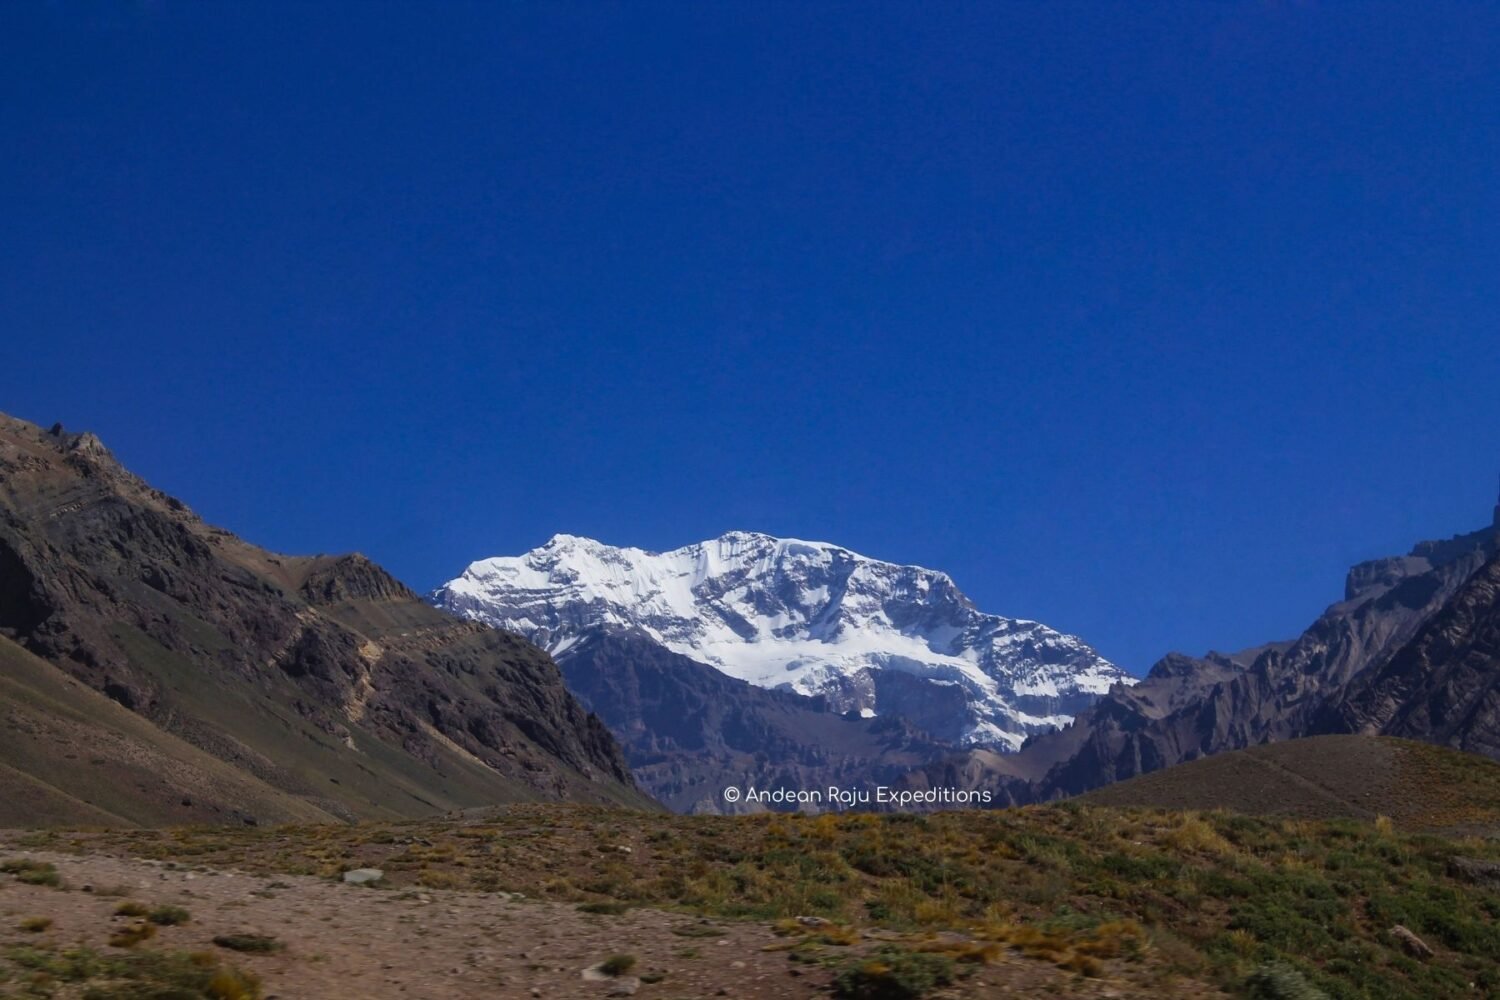 First view of Aconcagua